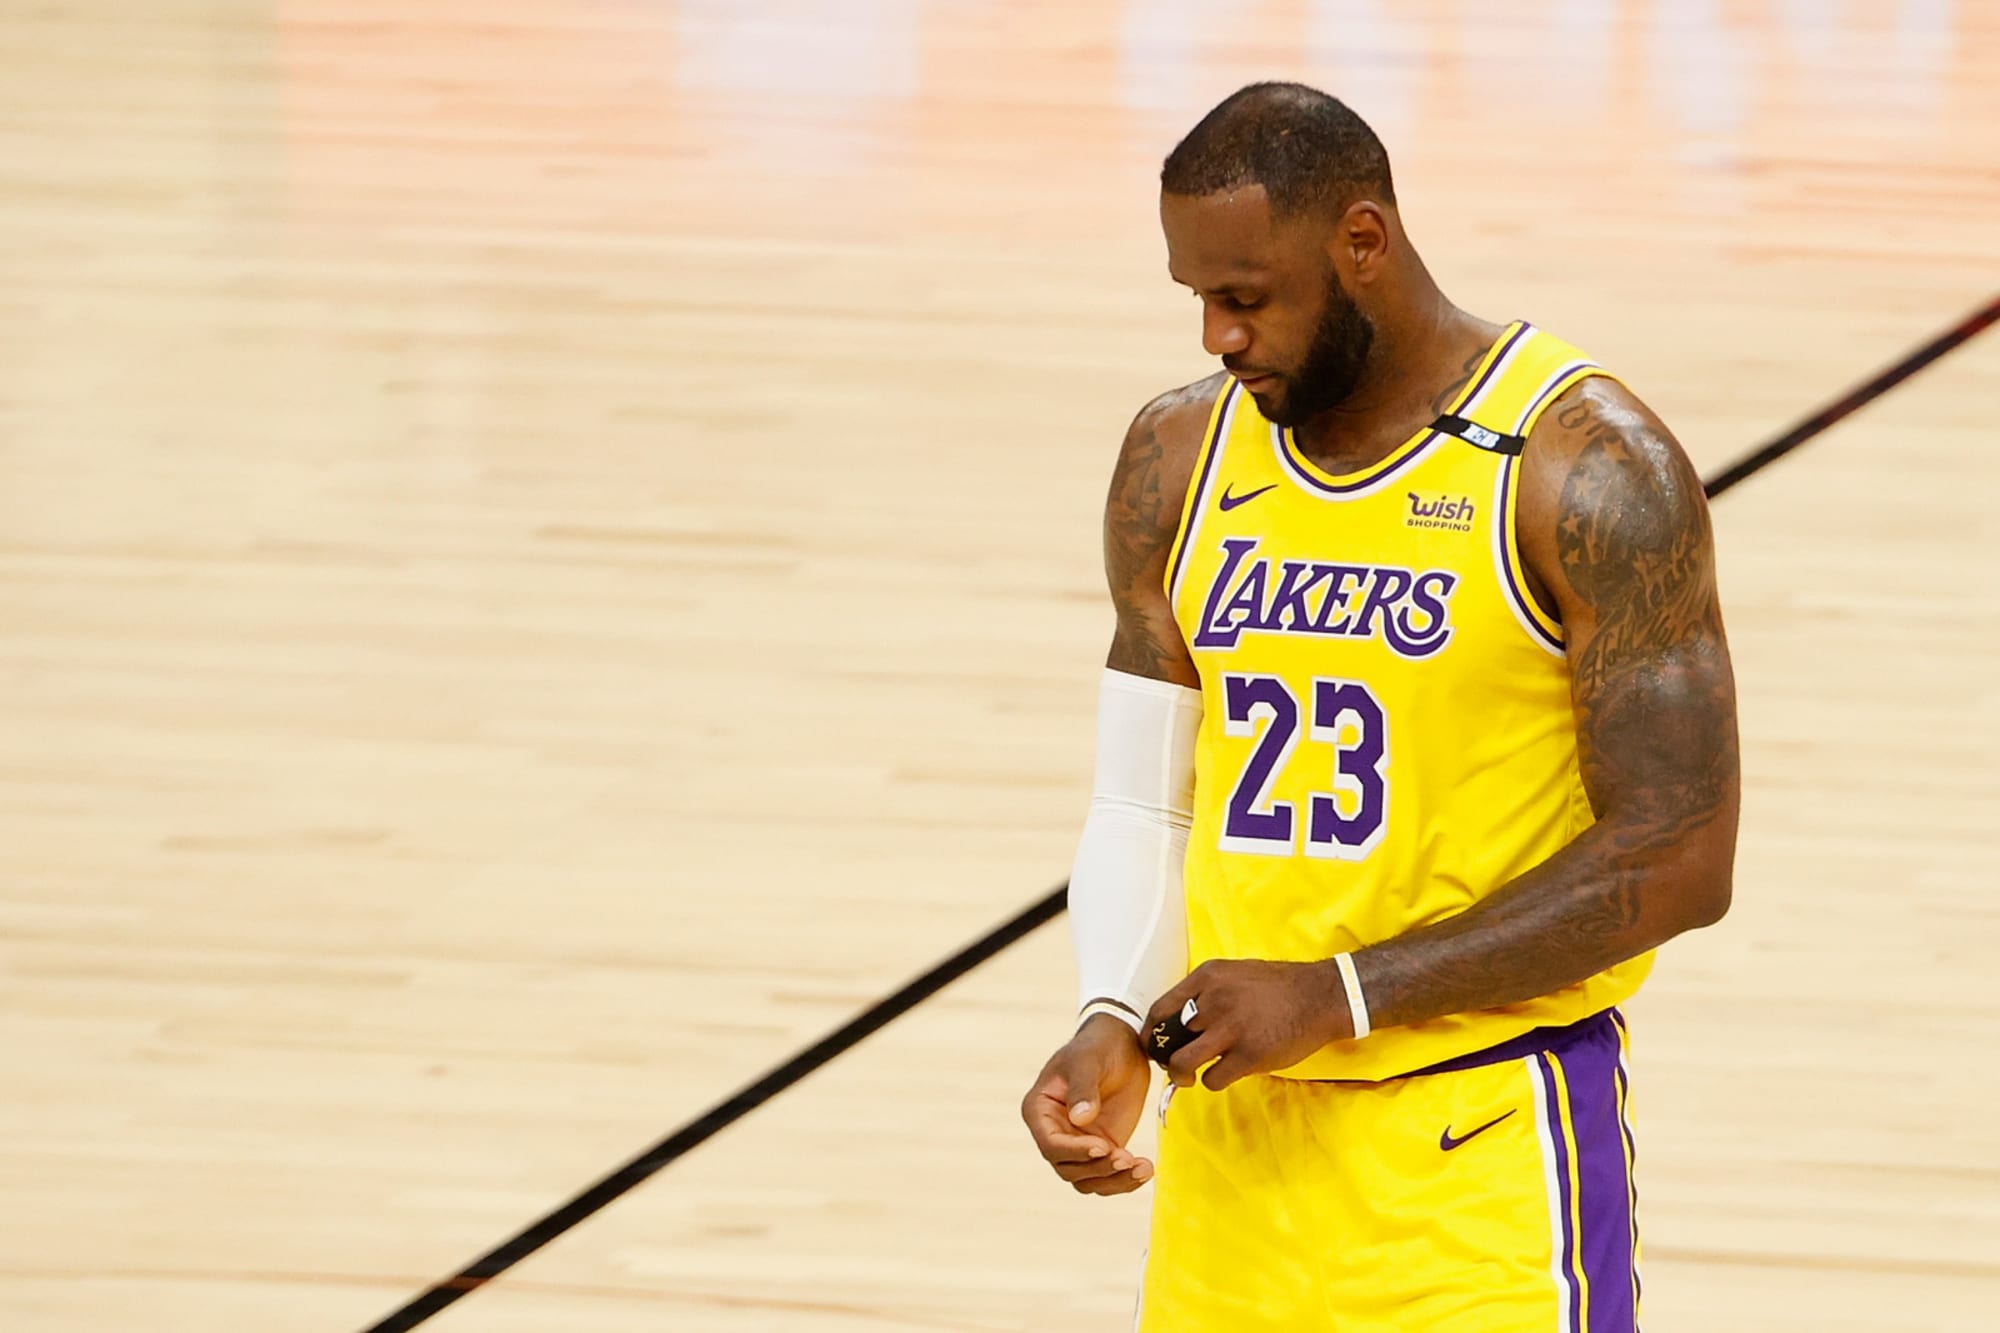 Should the Lakers eventually retire LeBron James' No. 23?